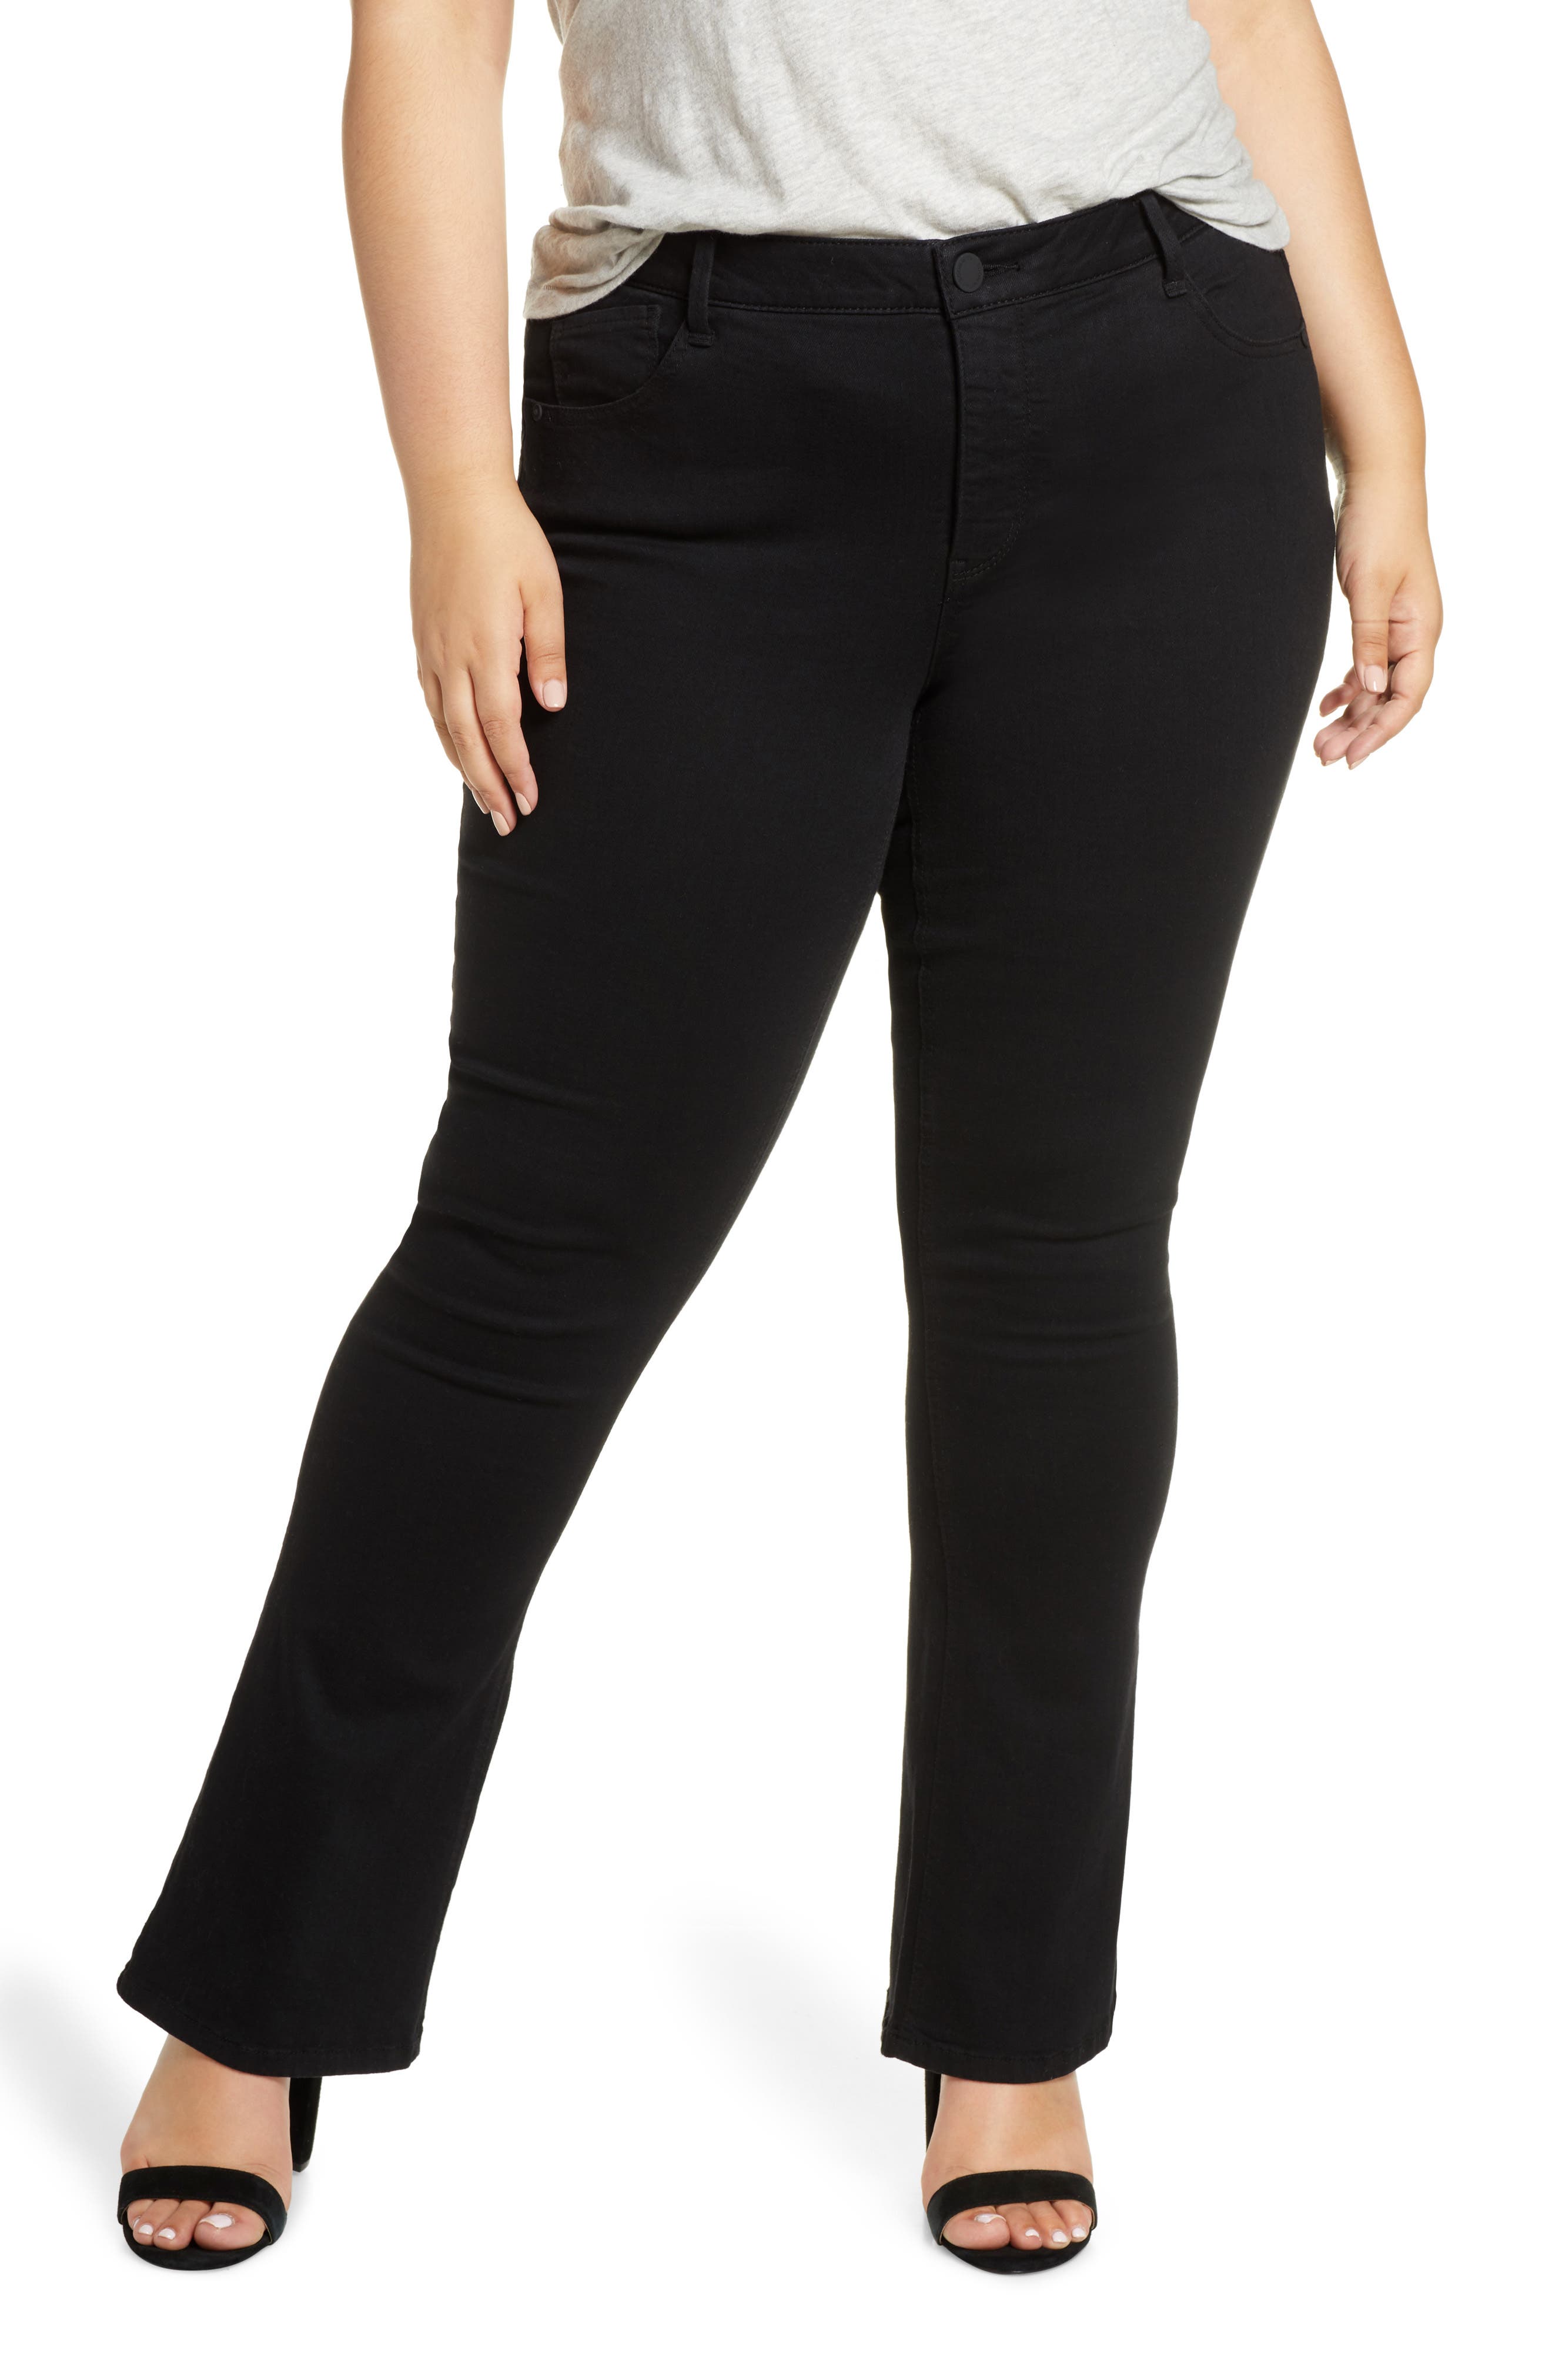 tall plus size jeans